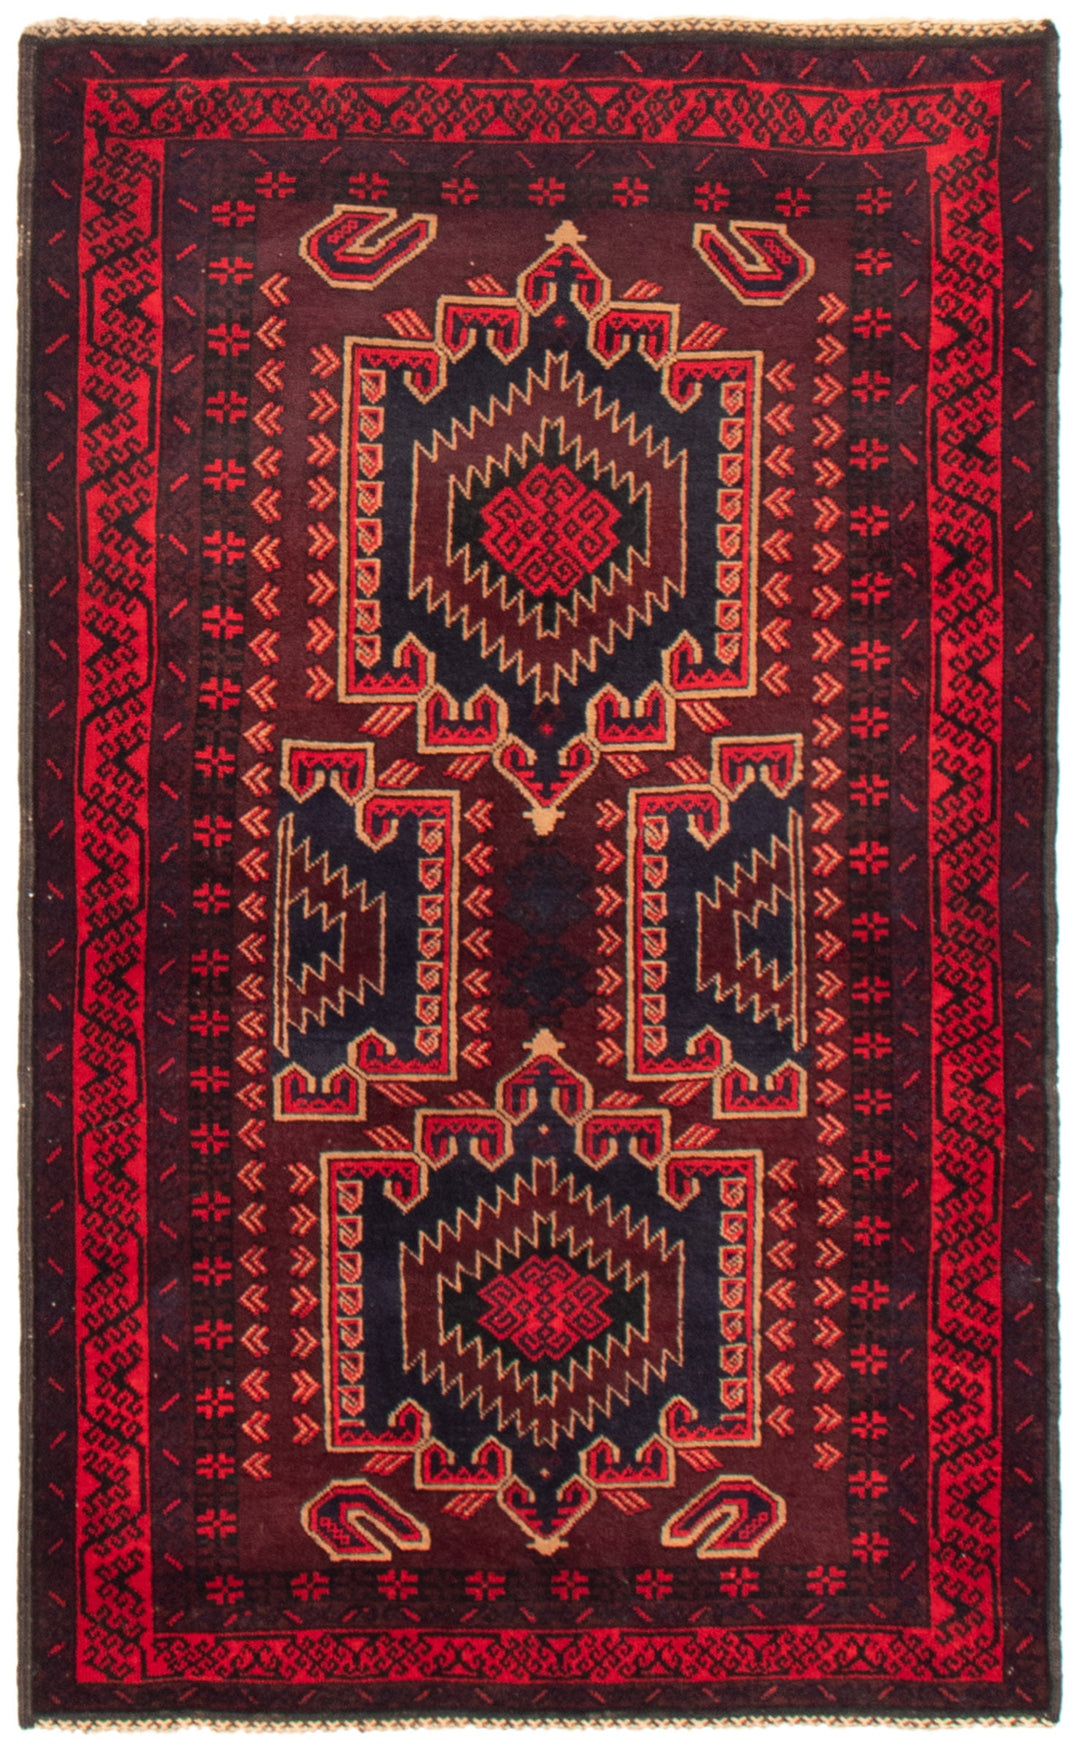 The Adelaide Rug, 3'6" x 6'4"